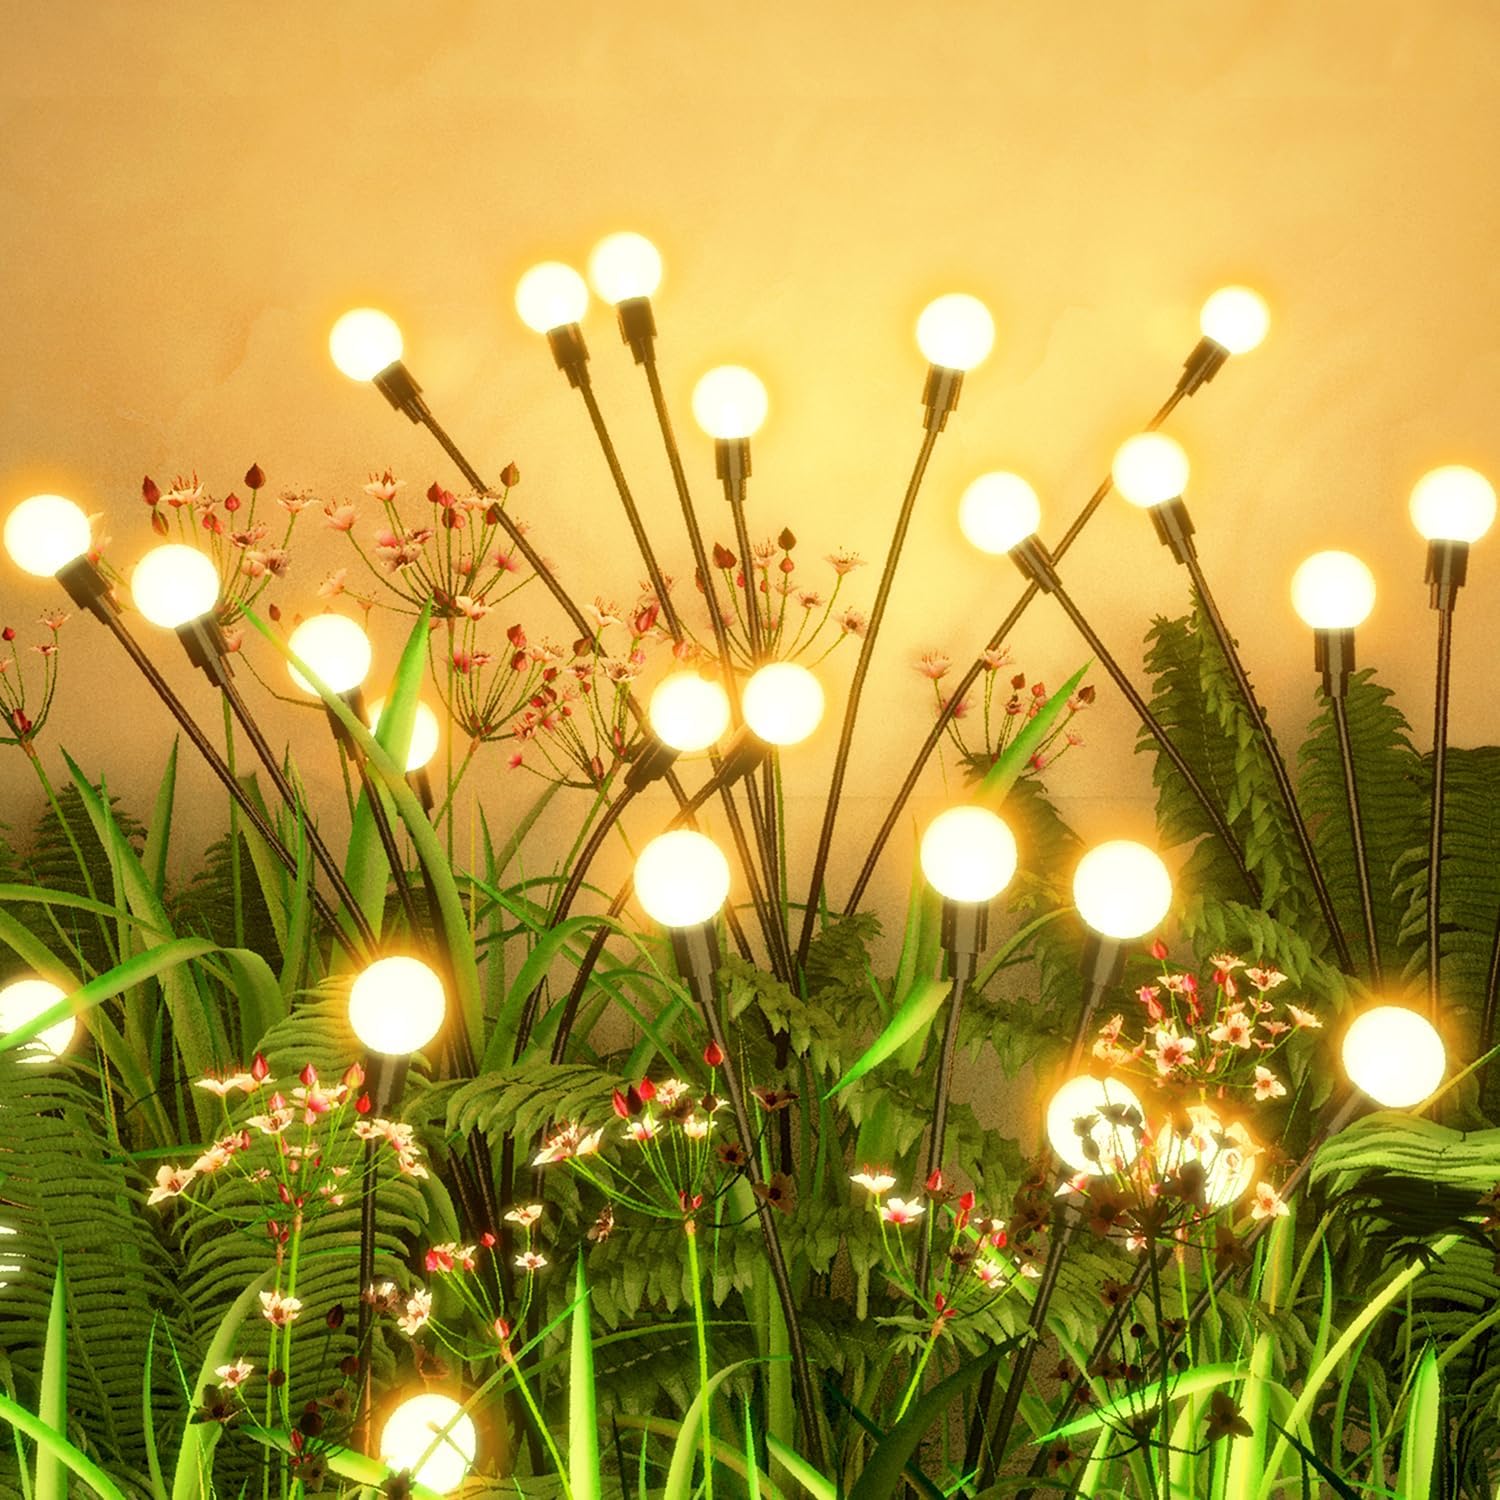 I really enjoy seeing these lights at night waving around my shrubbery bed. They are not unattractive even during daylight hours as they just look like pretty white balls. I plan to purchase more to line my sidewalk. I would recommend.